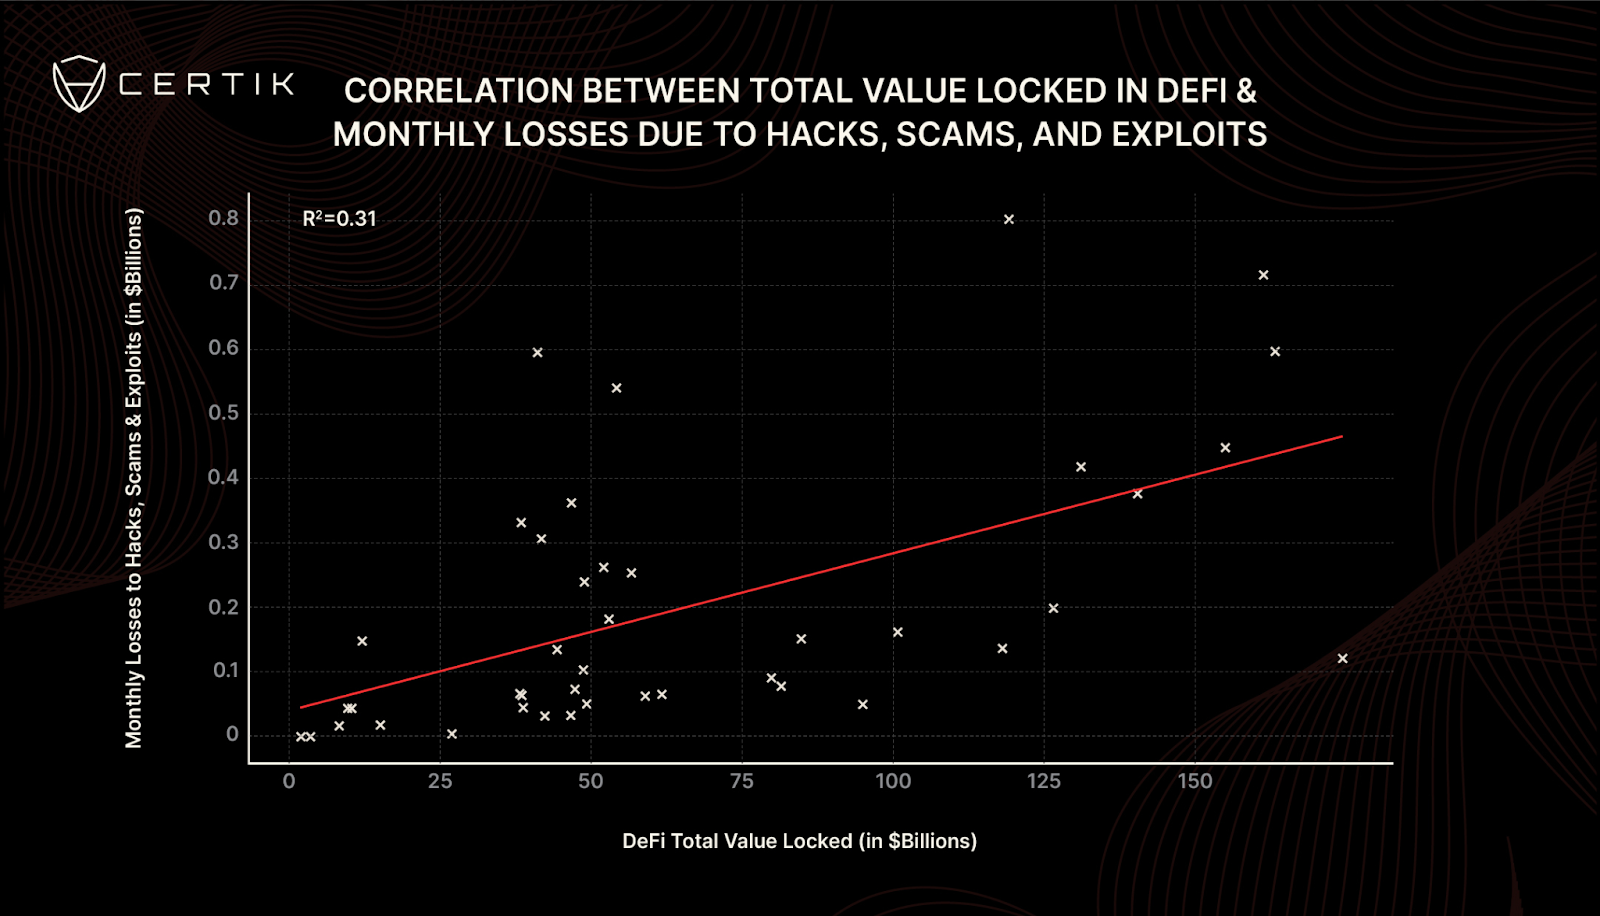 Analysis of Risk in Decentralized Finance: Correlation Between Total Value Locked and Magnitude of Losses from Security Breaches